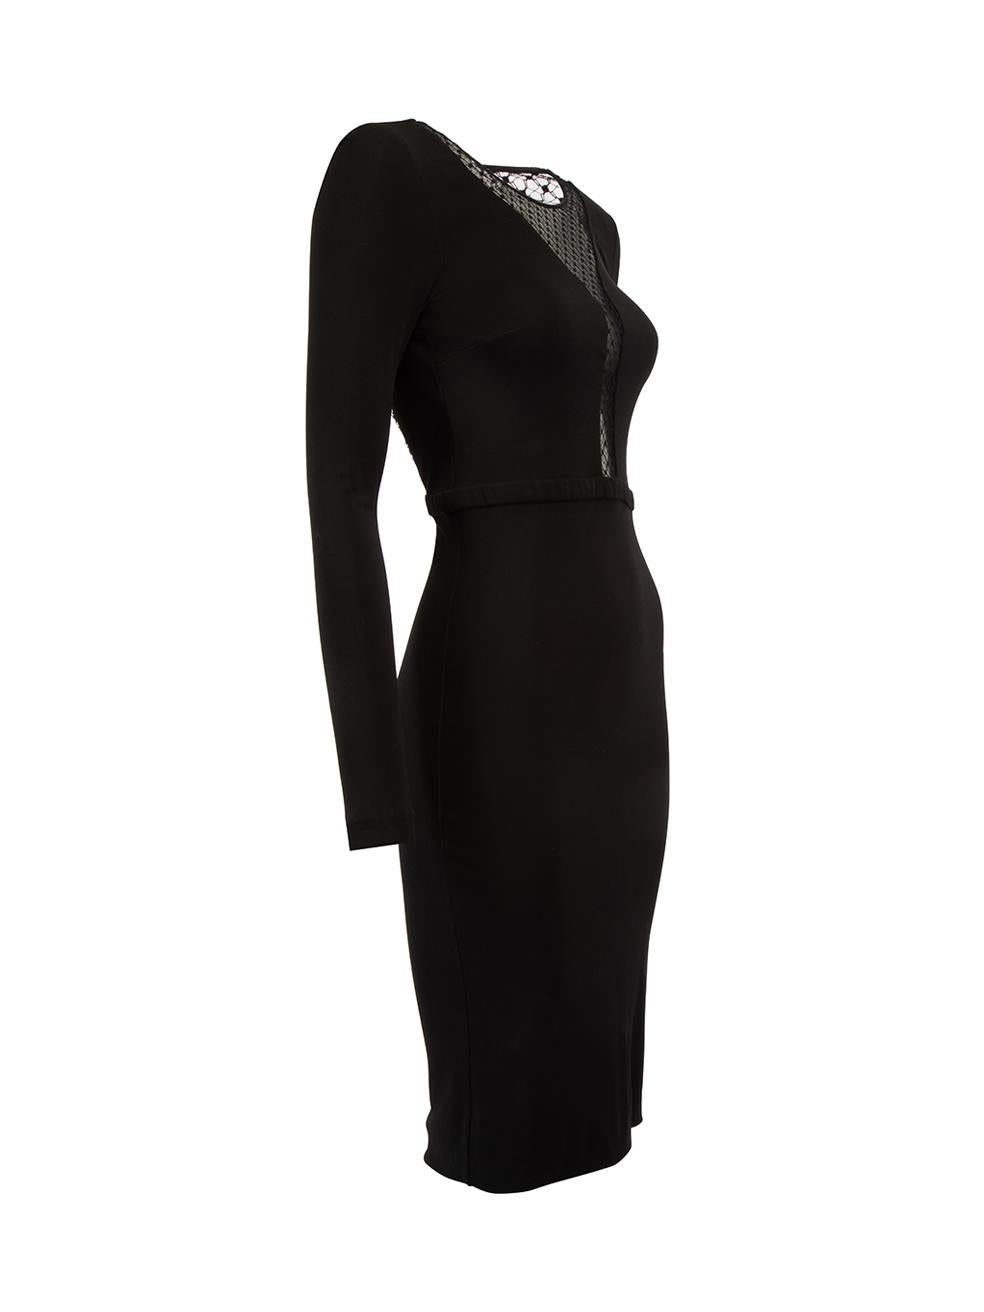 CONDITION is Very good. Minimal wear to dress is evident. Minimal wear to the outer fabricon this used Gucci designer resale item. This item also includes a Gucci garment bag.  Details  Black Viscose Knee length dress Mesh see through panel Plunge